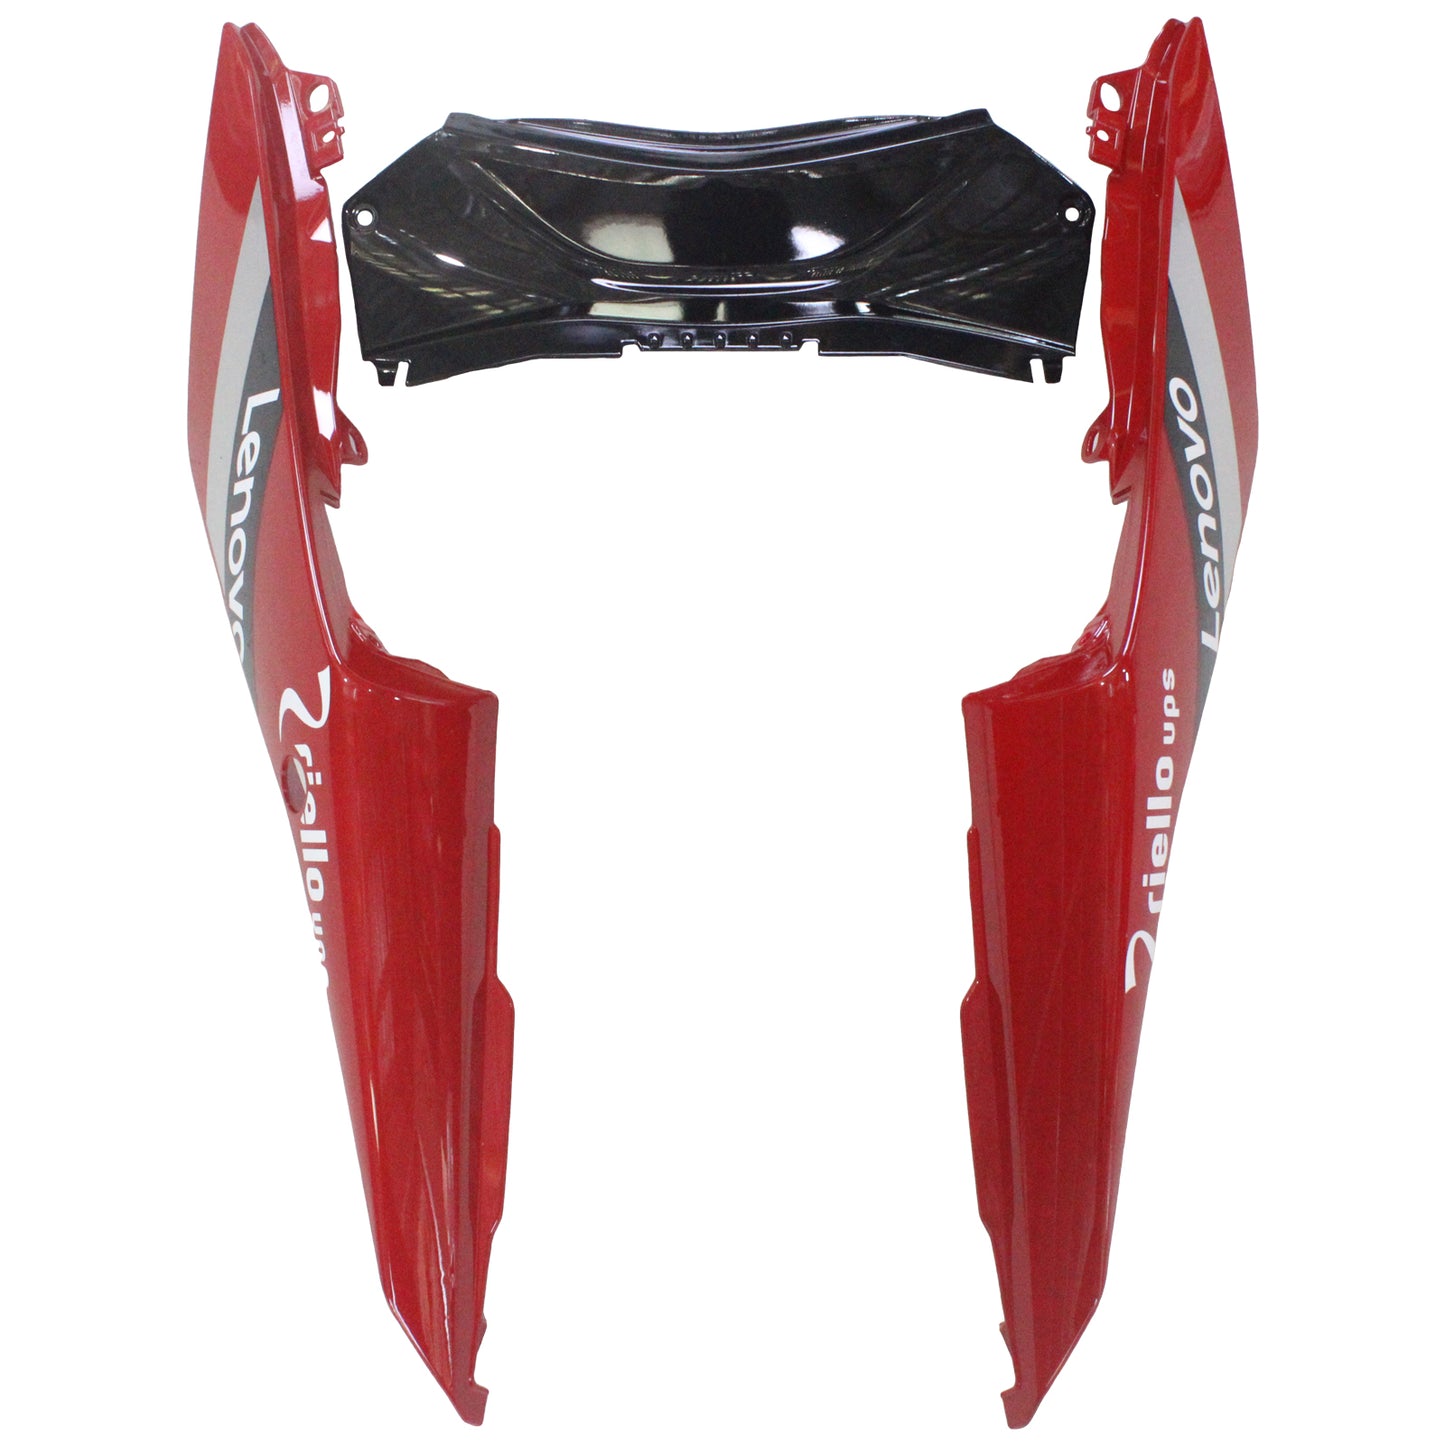 Amotopart Yamaha 2019-2021 YZF R3/YZF R25 Red Black Fearing Kit